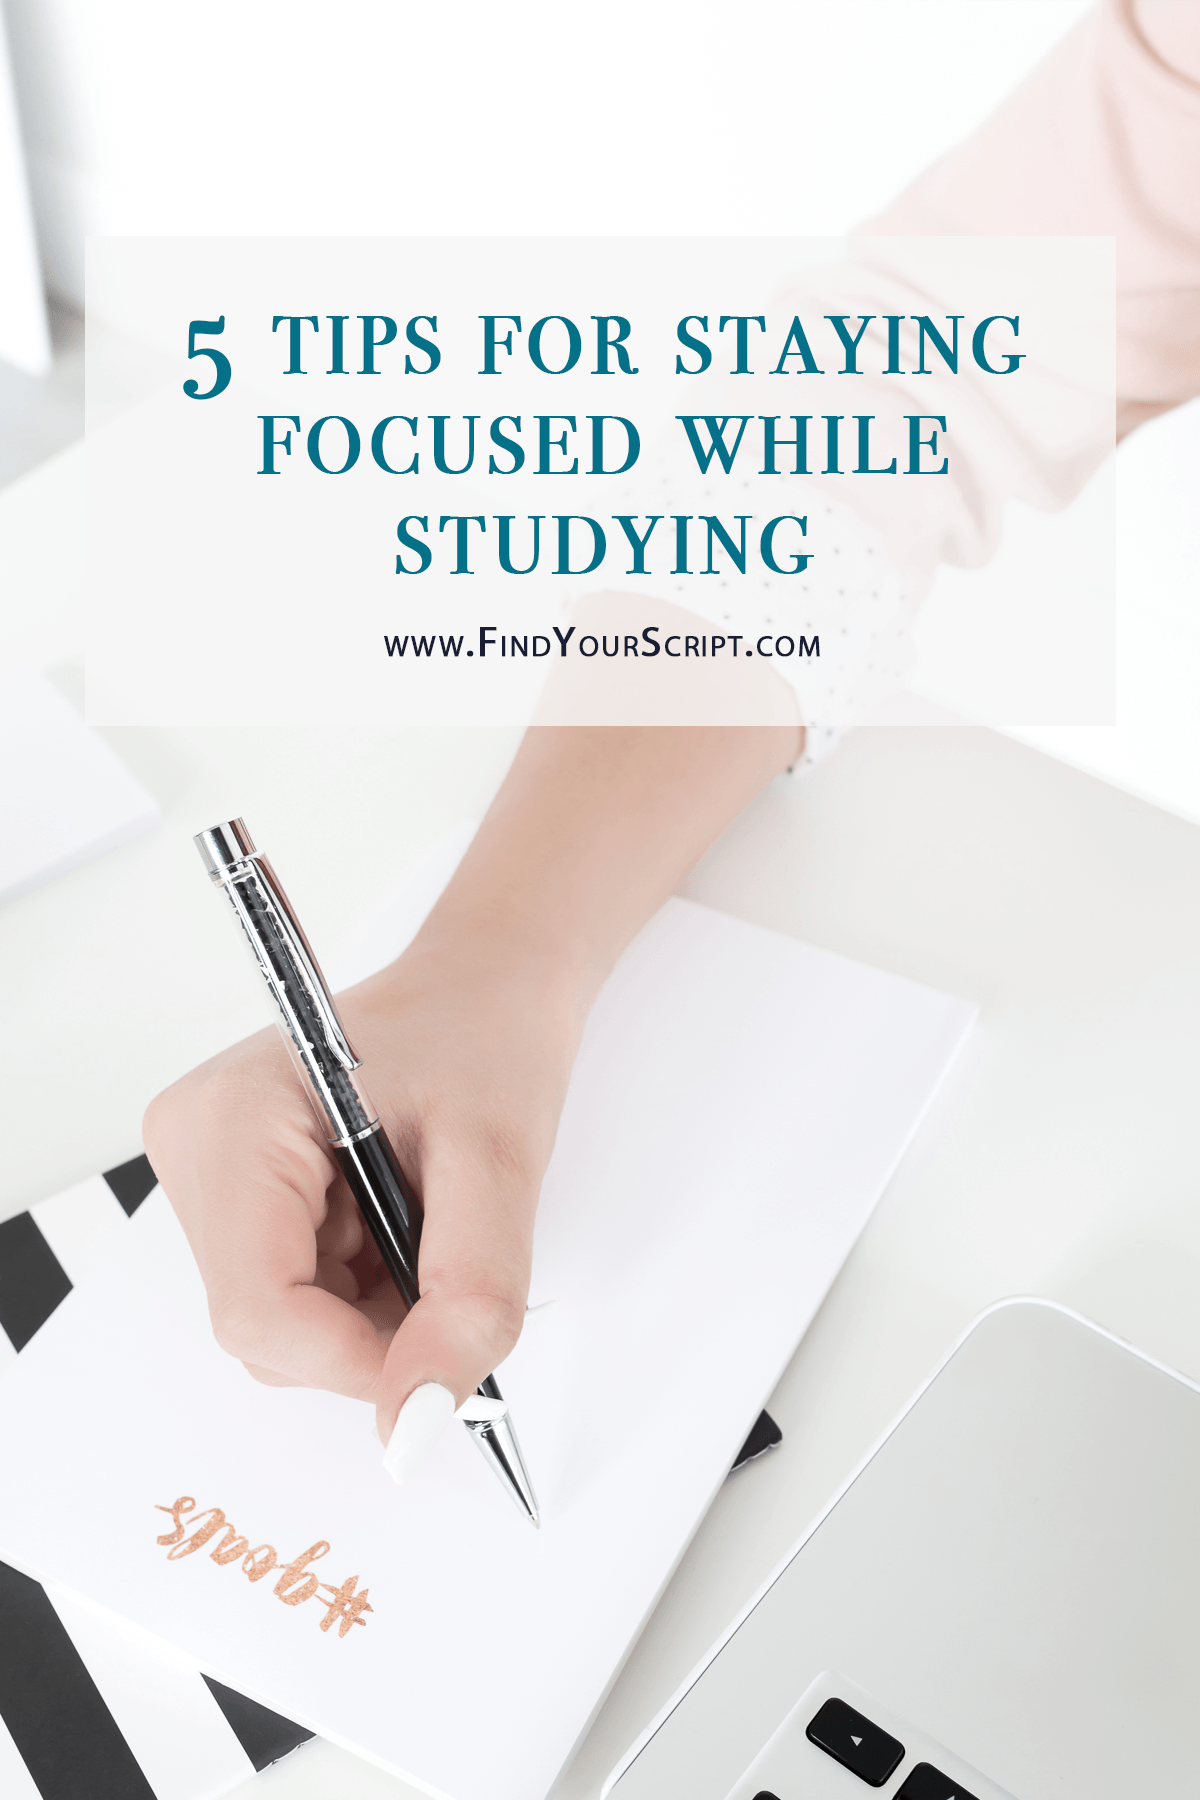 5 Tips for Staying Focused While Studying | Find Your Script